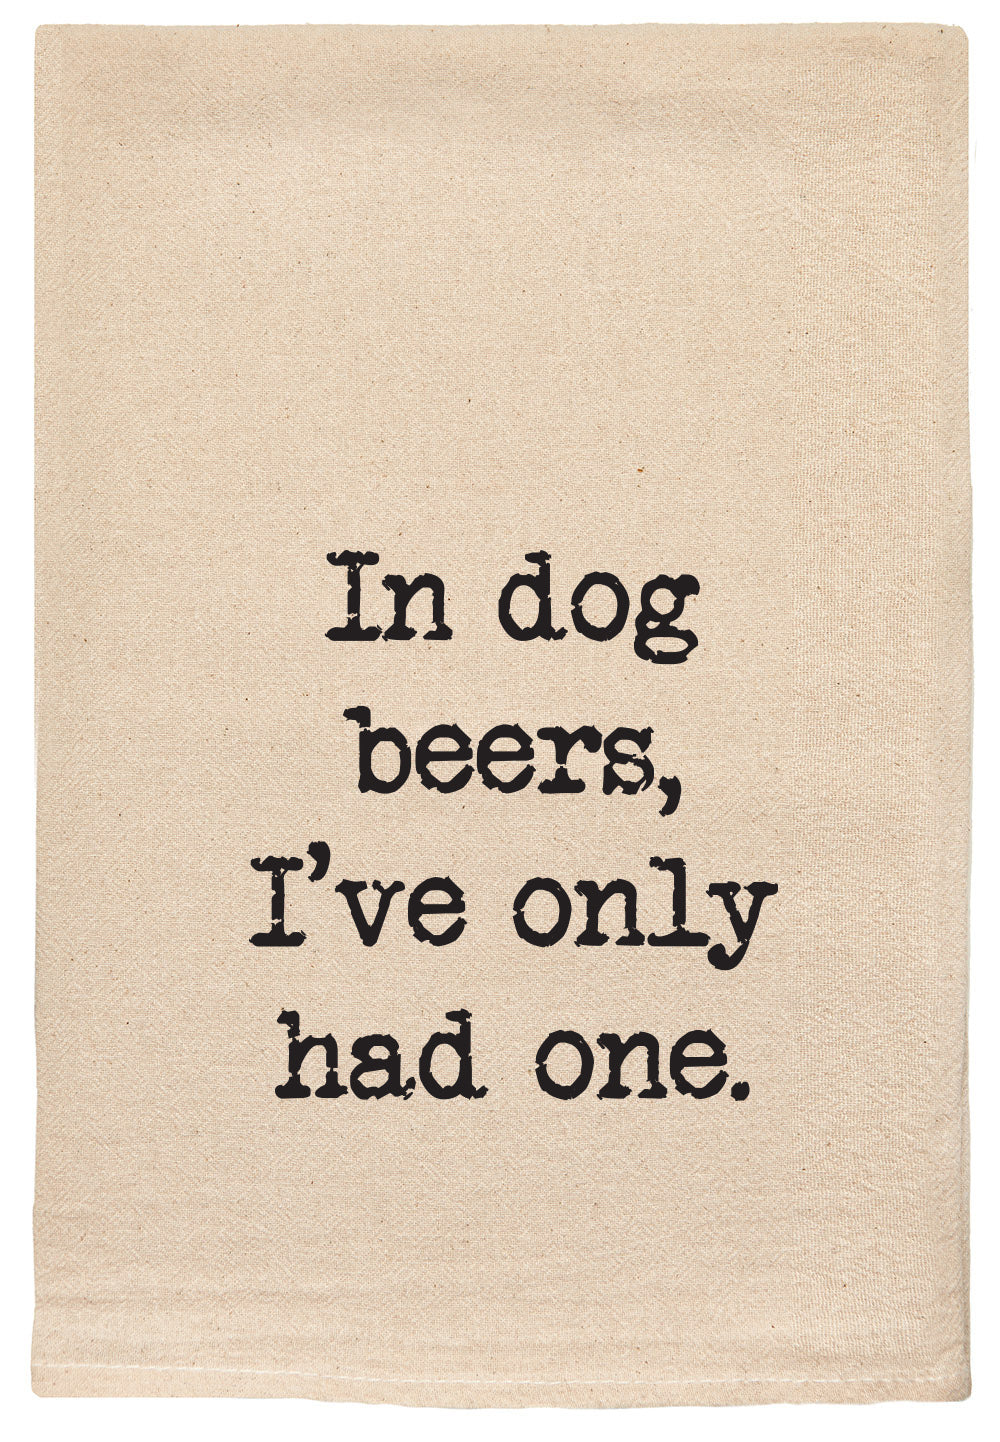 In dog beers, I've only had one.